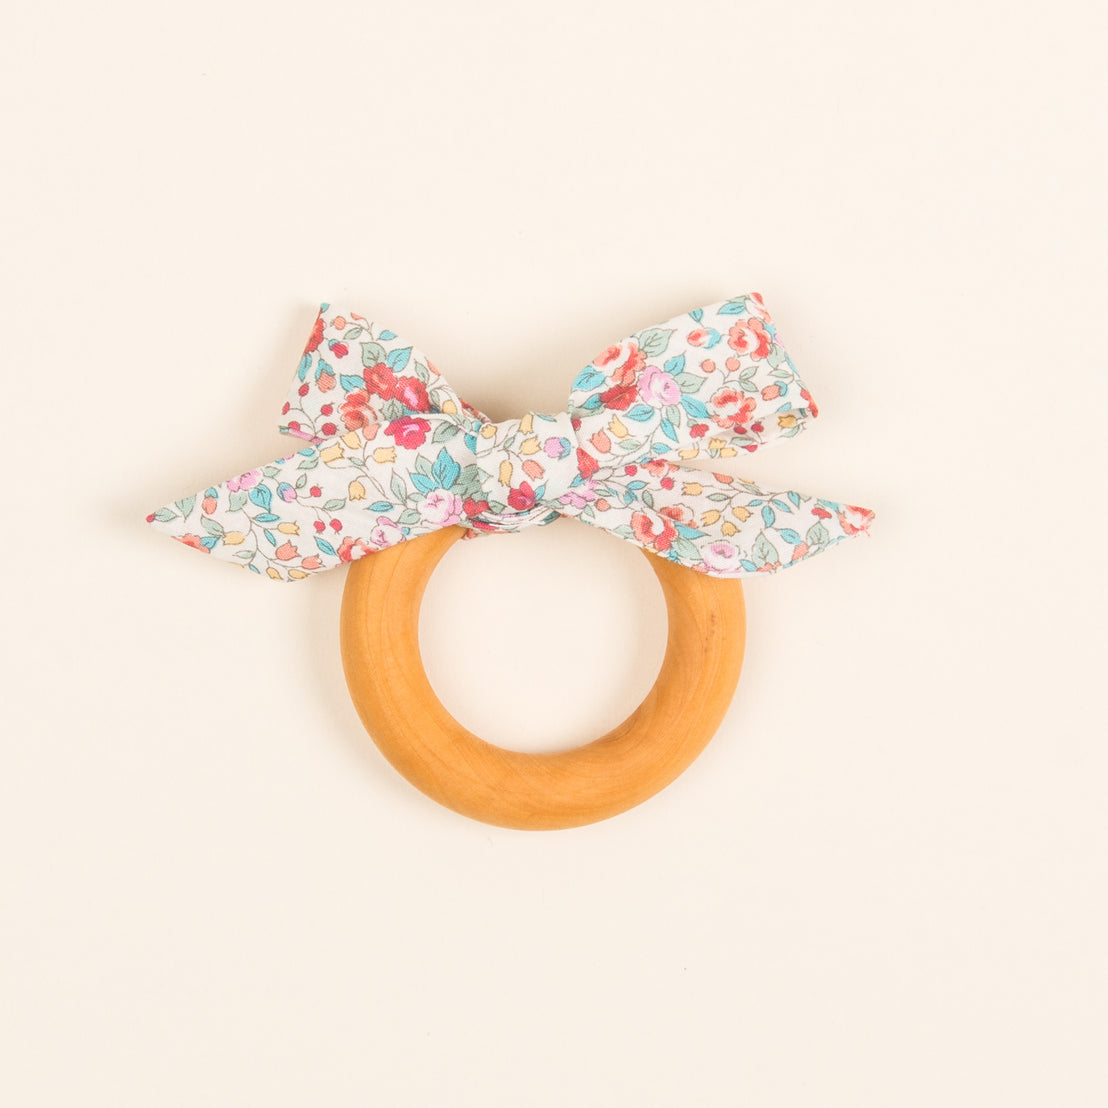 An upscale, vintage-inspired Petite Fleur Wooden Teether Ring with a floral patterned fabric bow, positioned on a light beige background.